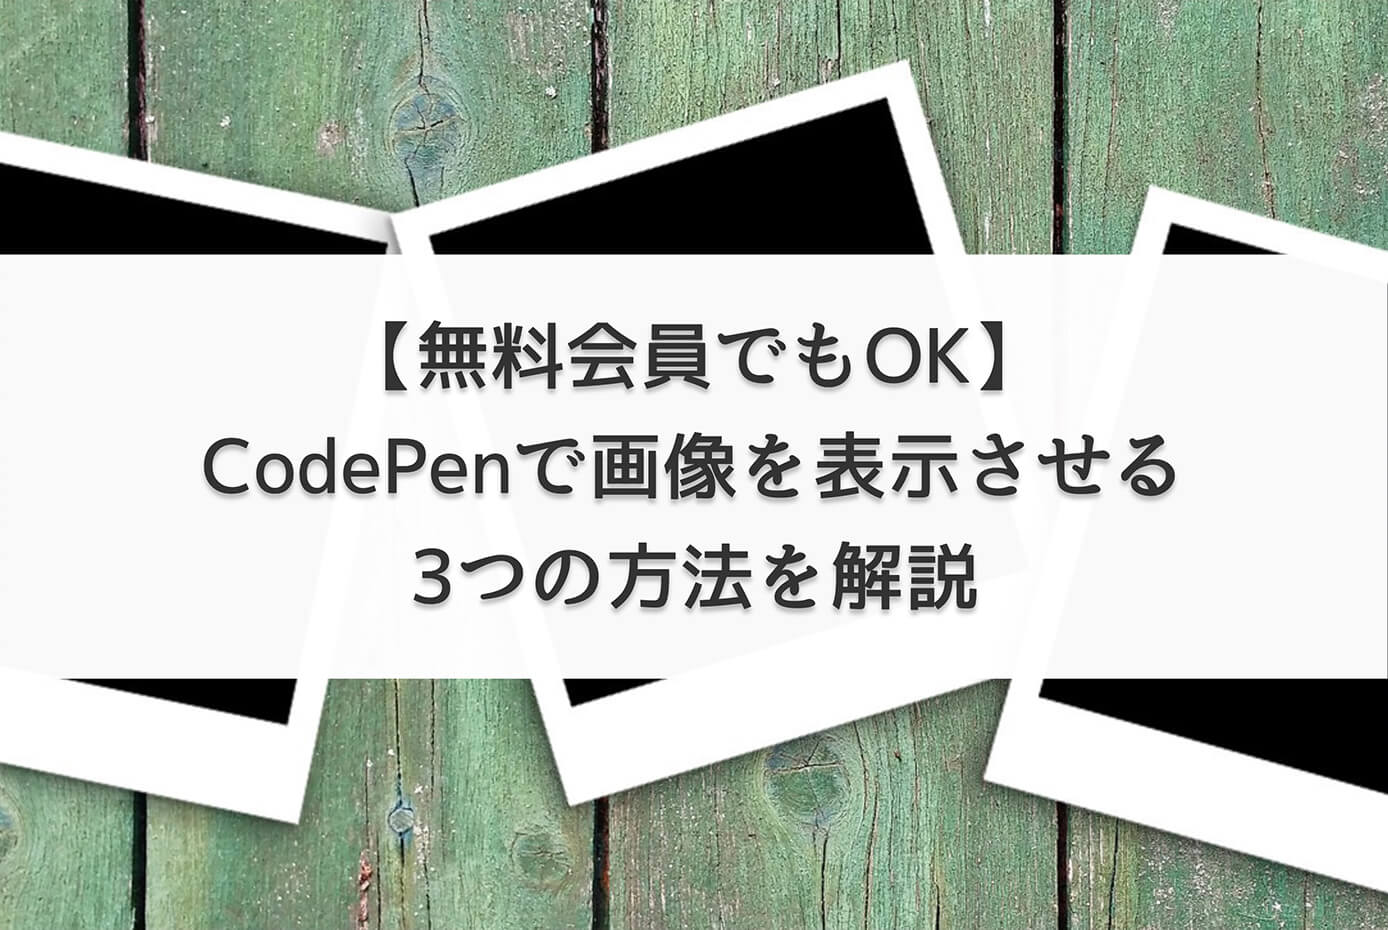 CodePenで画像を表示させる3つの方法を解説【無料会員でもOK】